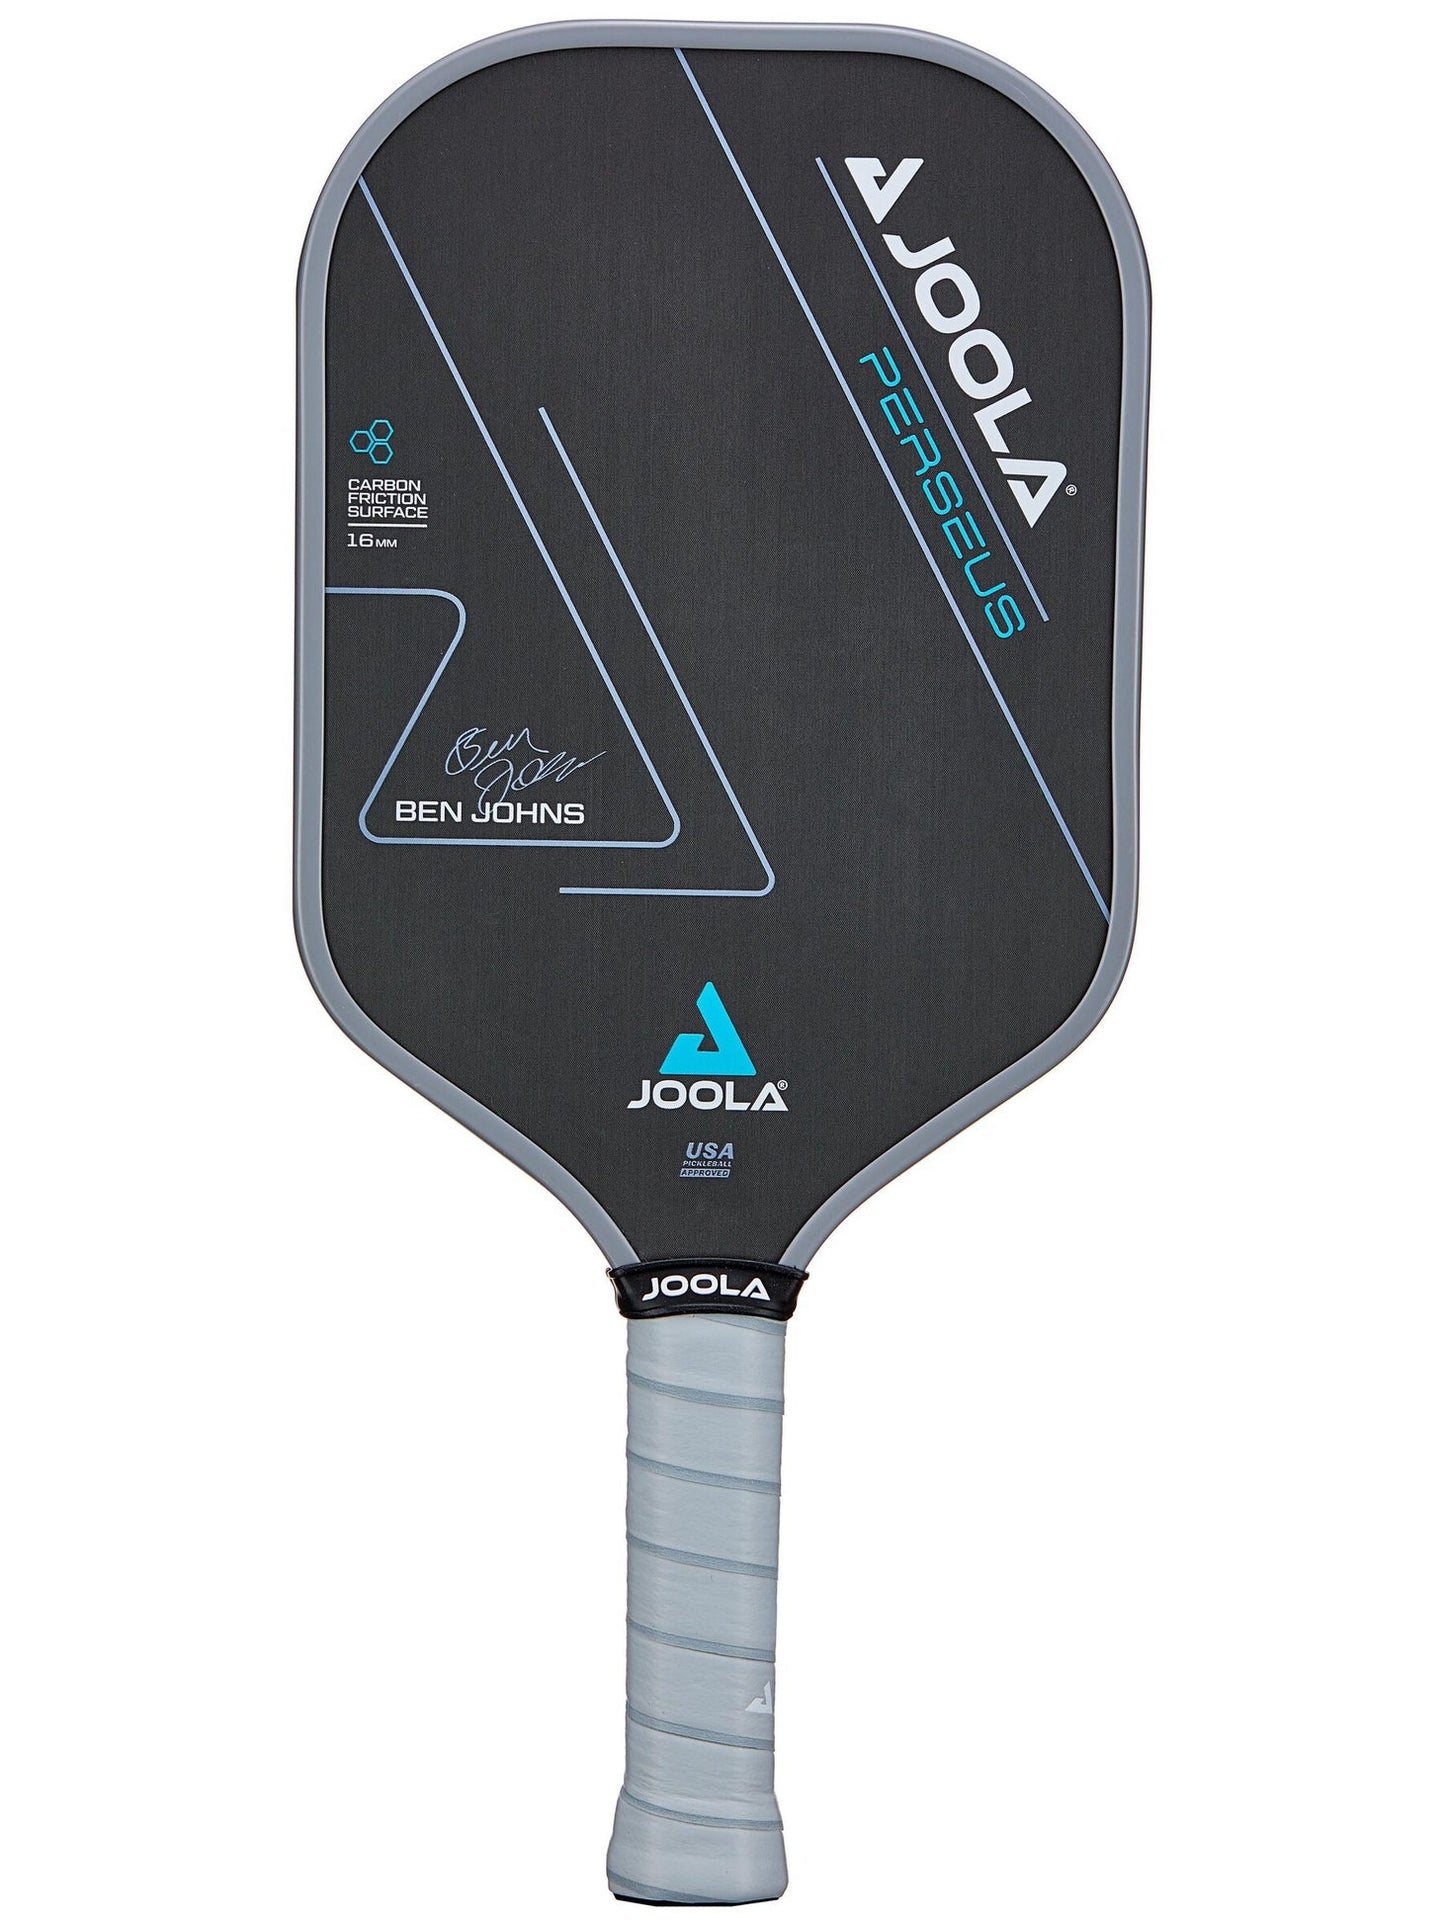 A JOOLA Ben Johns Perseus CFS 16mm Pickleball Paddle with a black and blue handle.